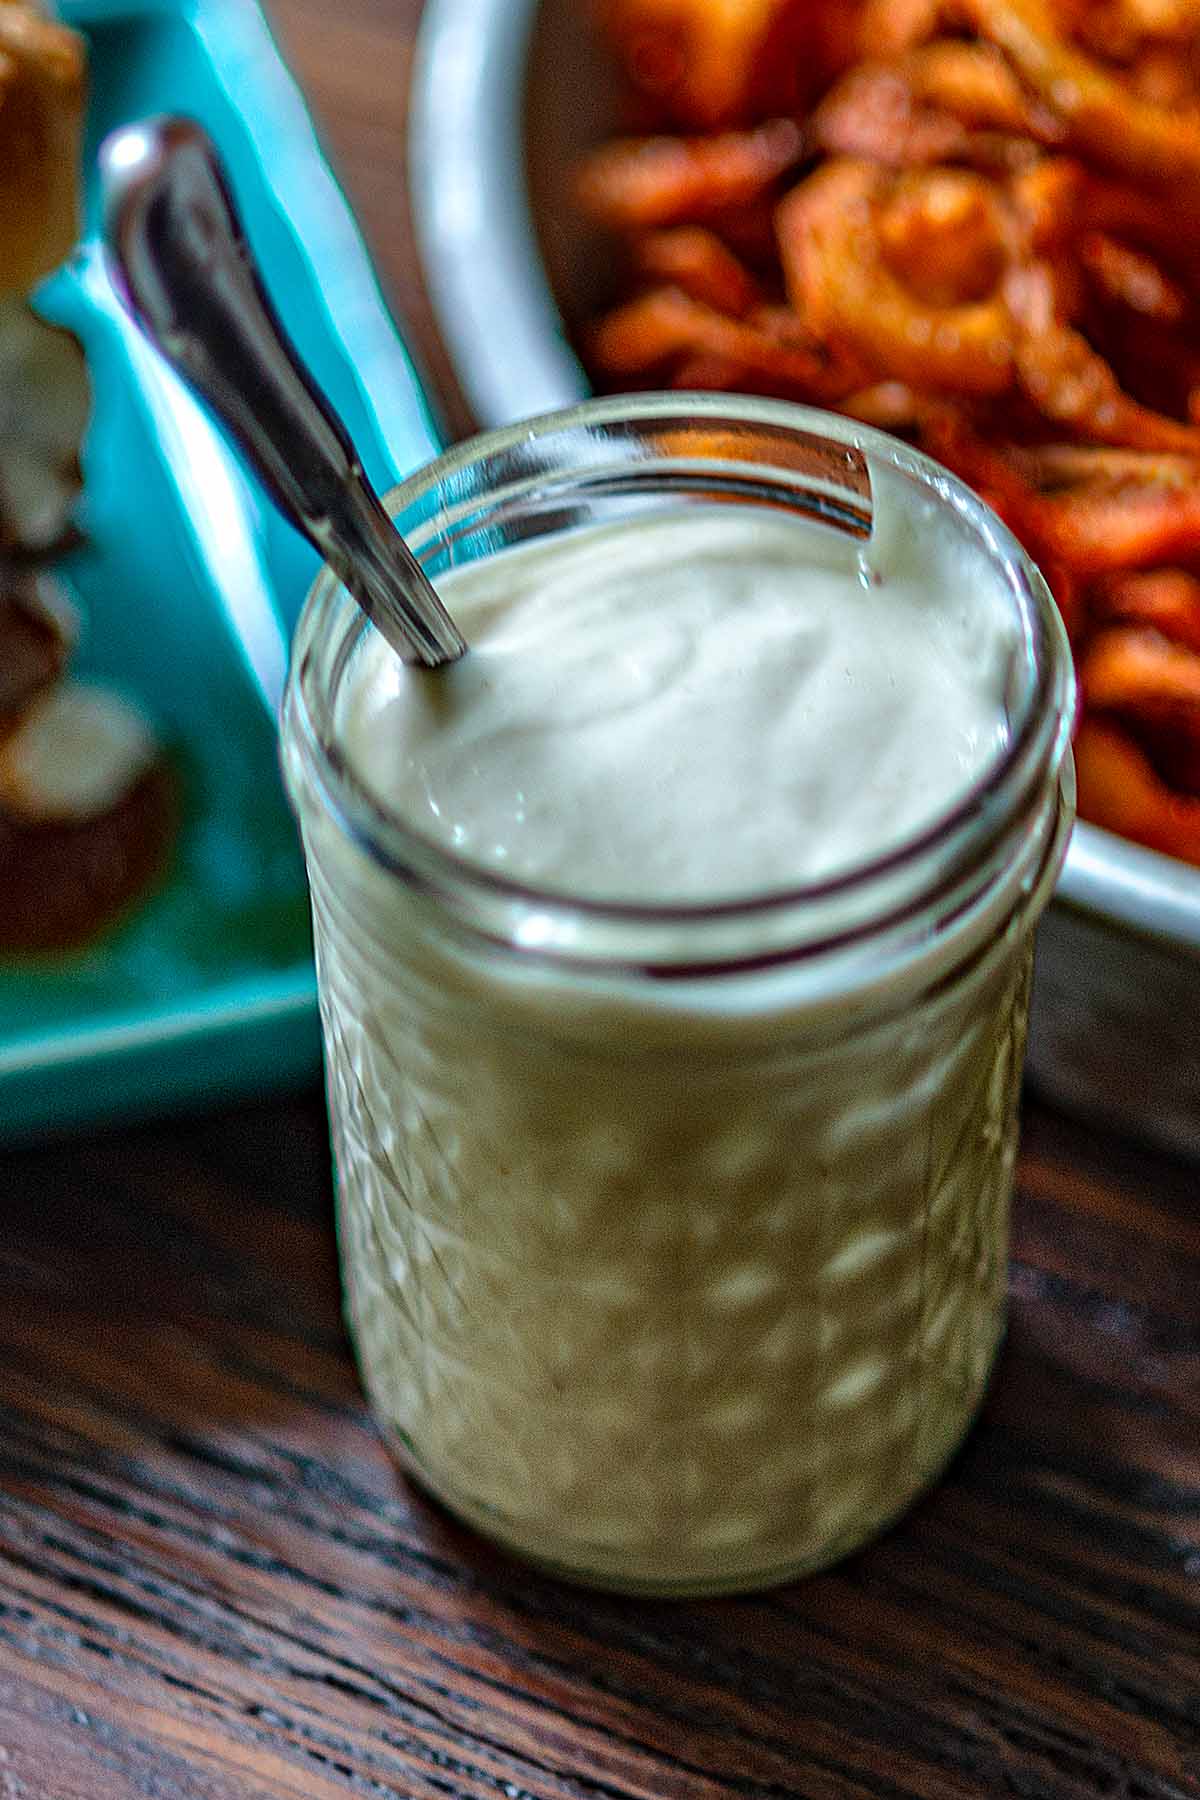 Homemade Arby's Horsey Sauce in a small jar with a spoon and curly fries on the side.